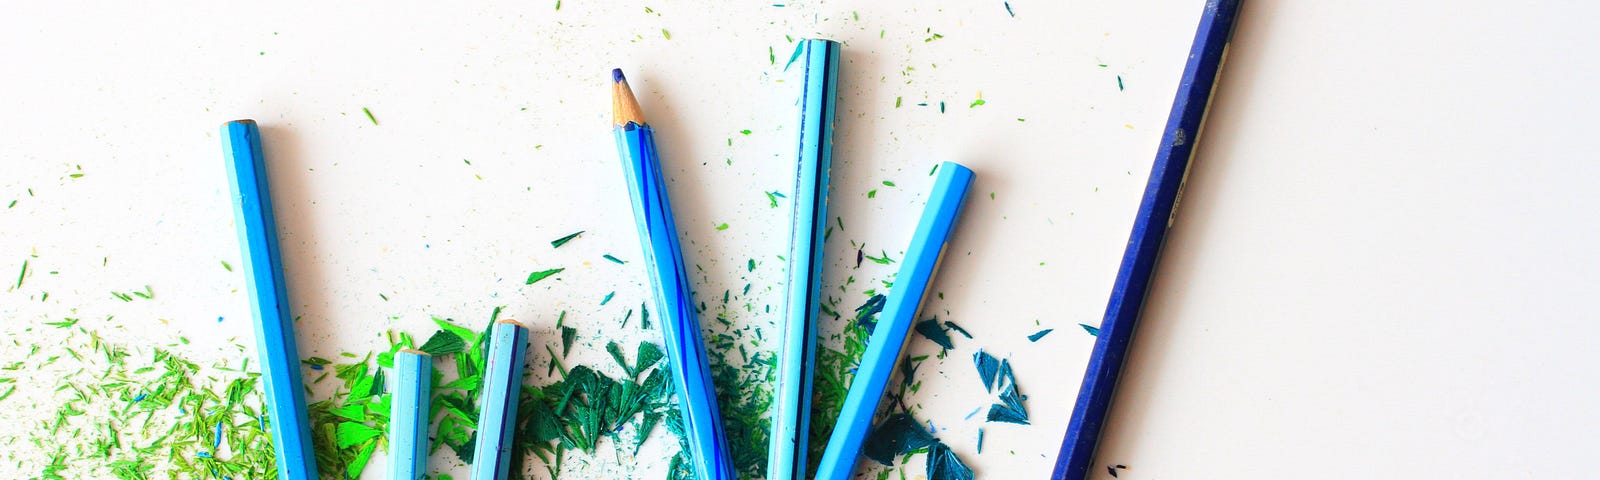 Blue colored pencils and pencil shavings.